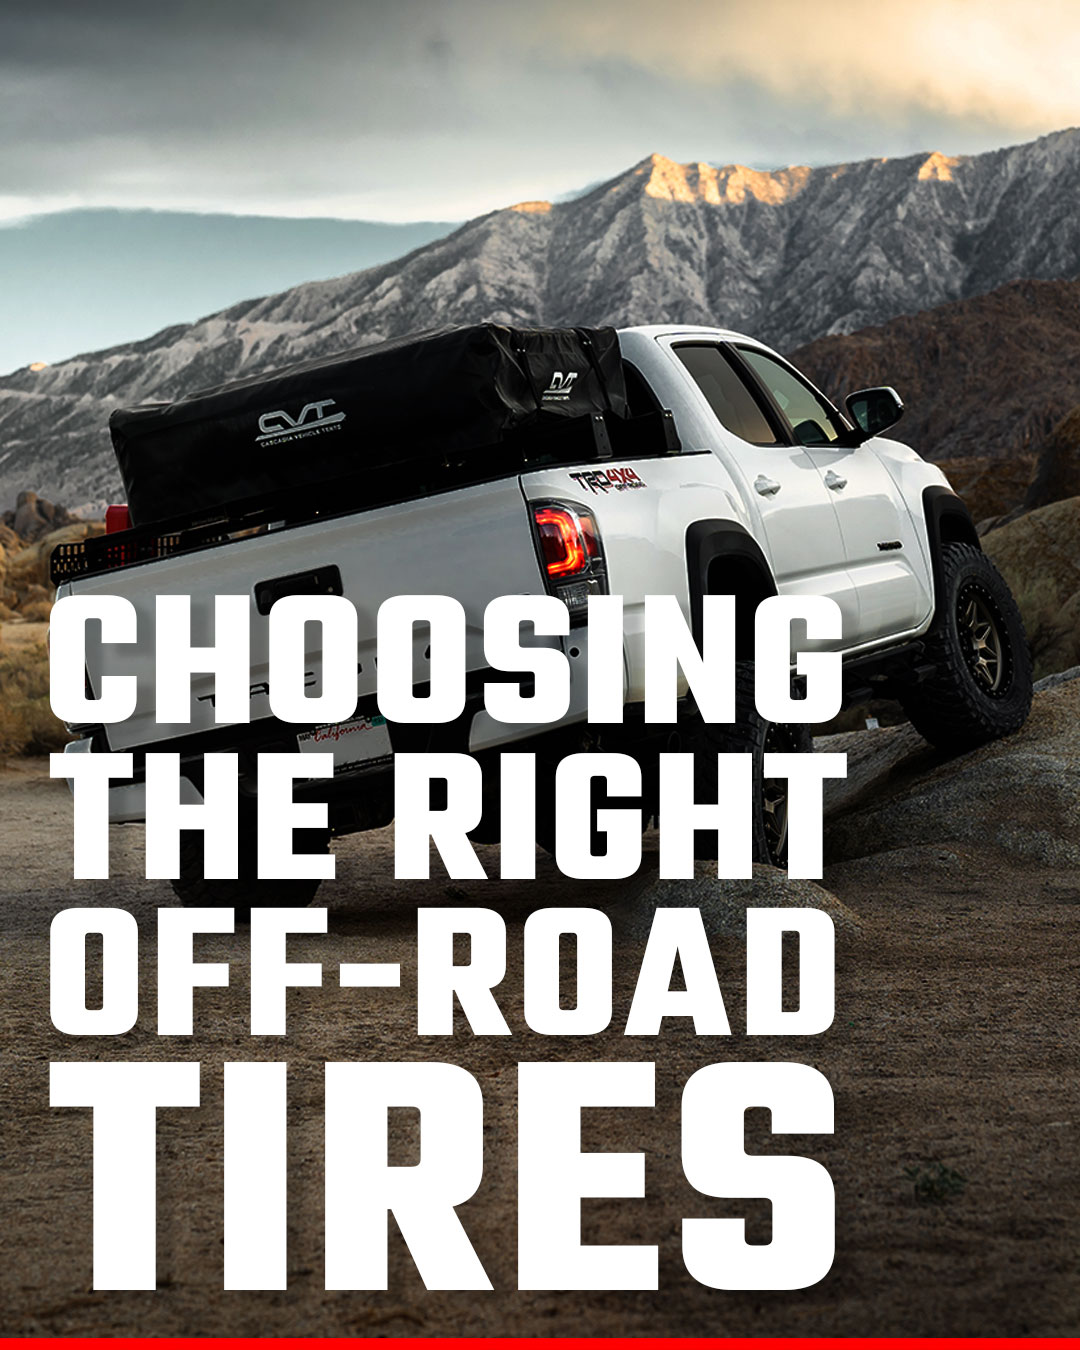 How To Choose Off-Road Tires Featured Image